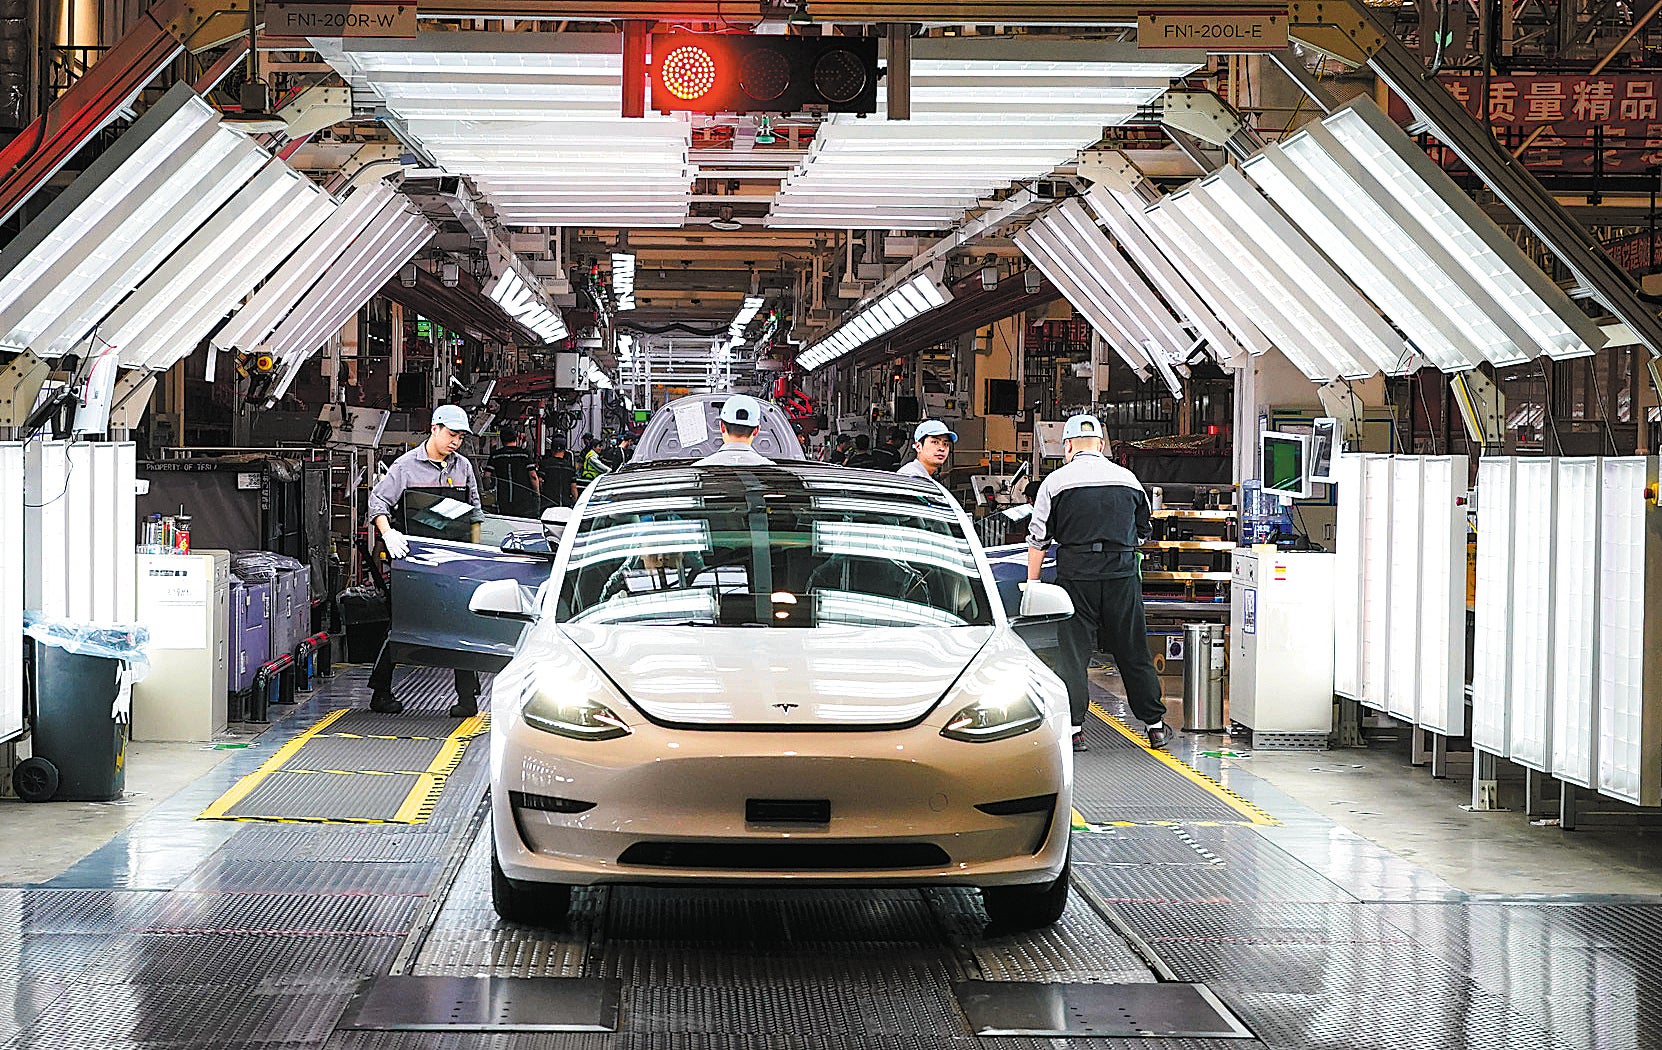 Workers put final touches to a vehicle at Tesla’s gigafactory in Shanghai.